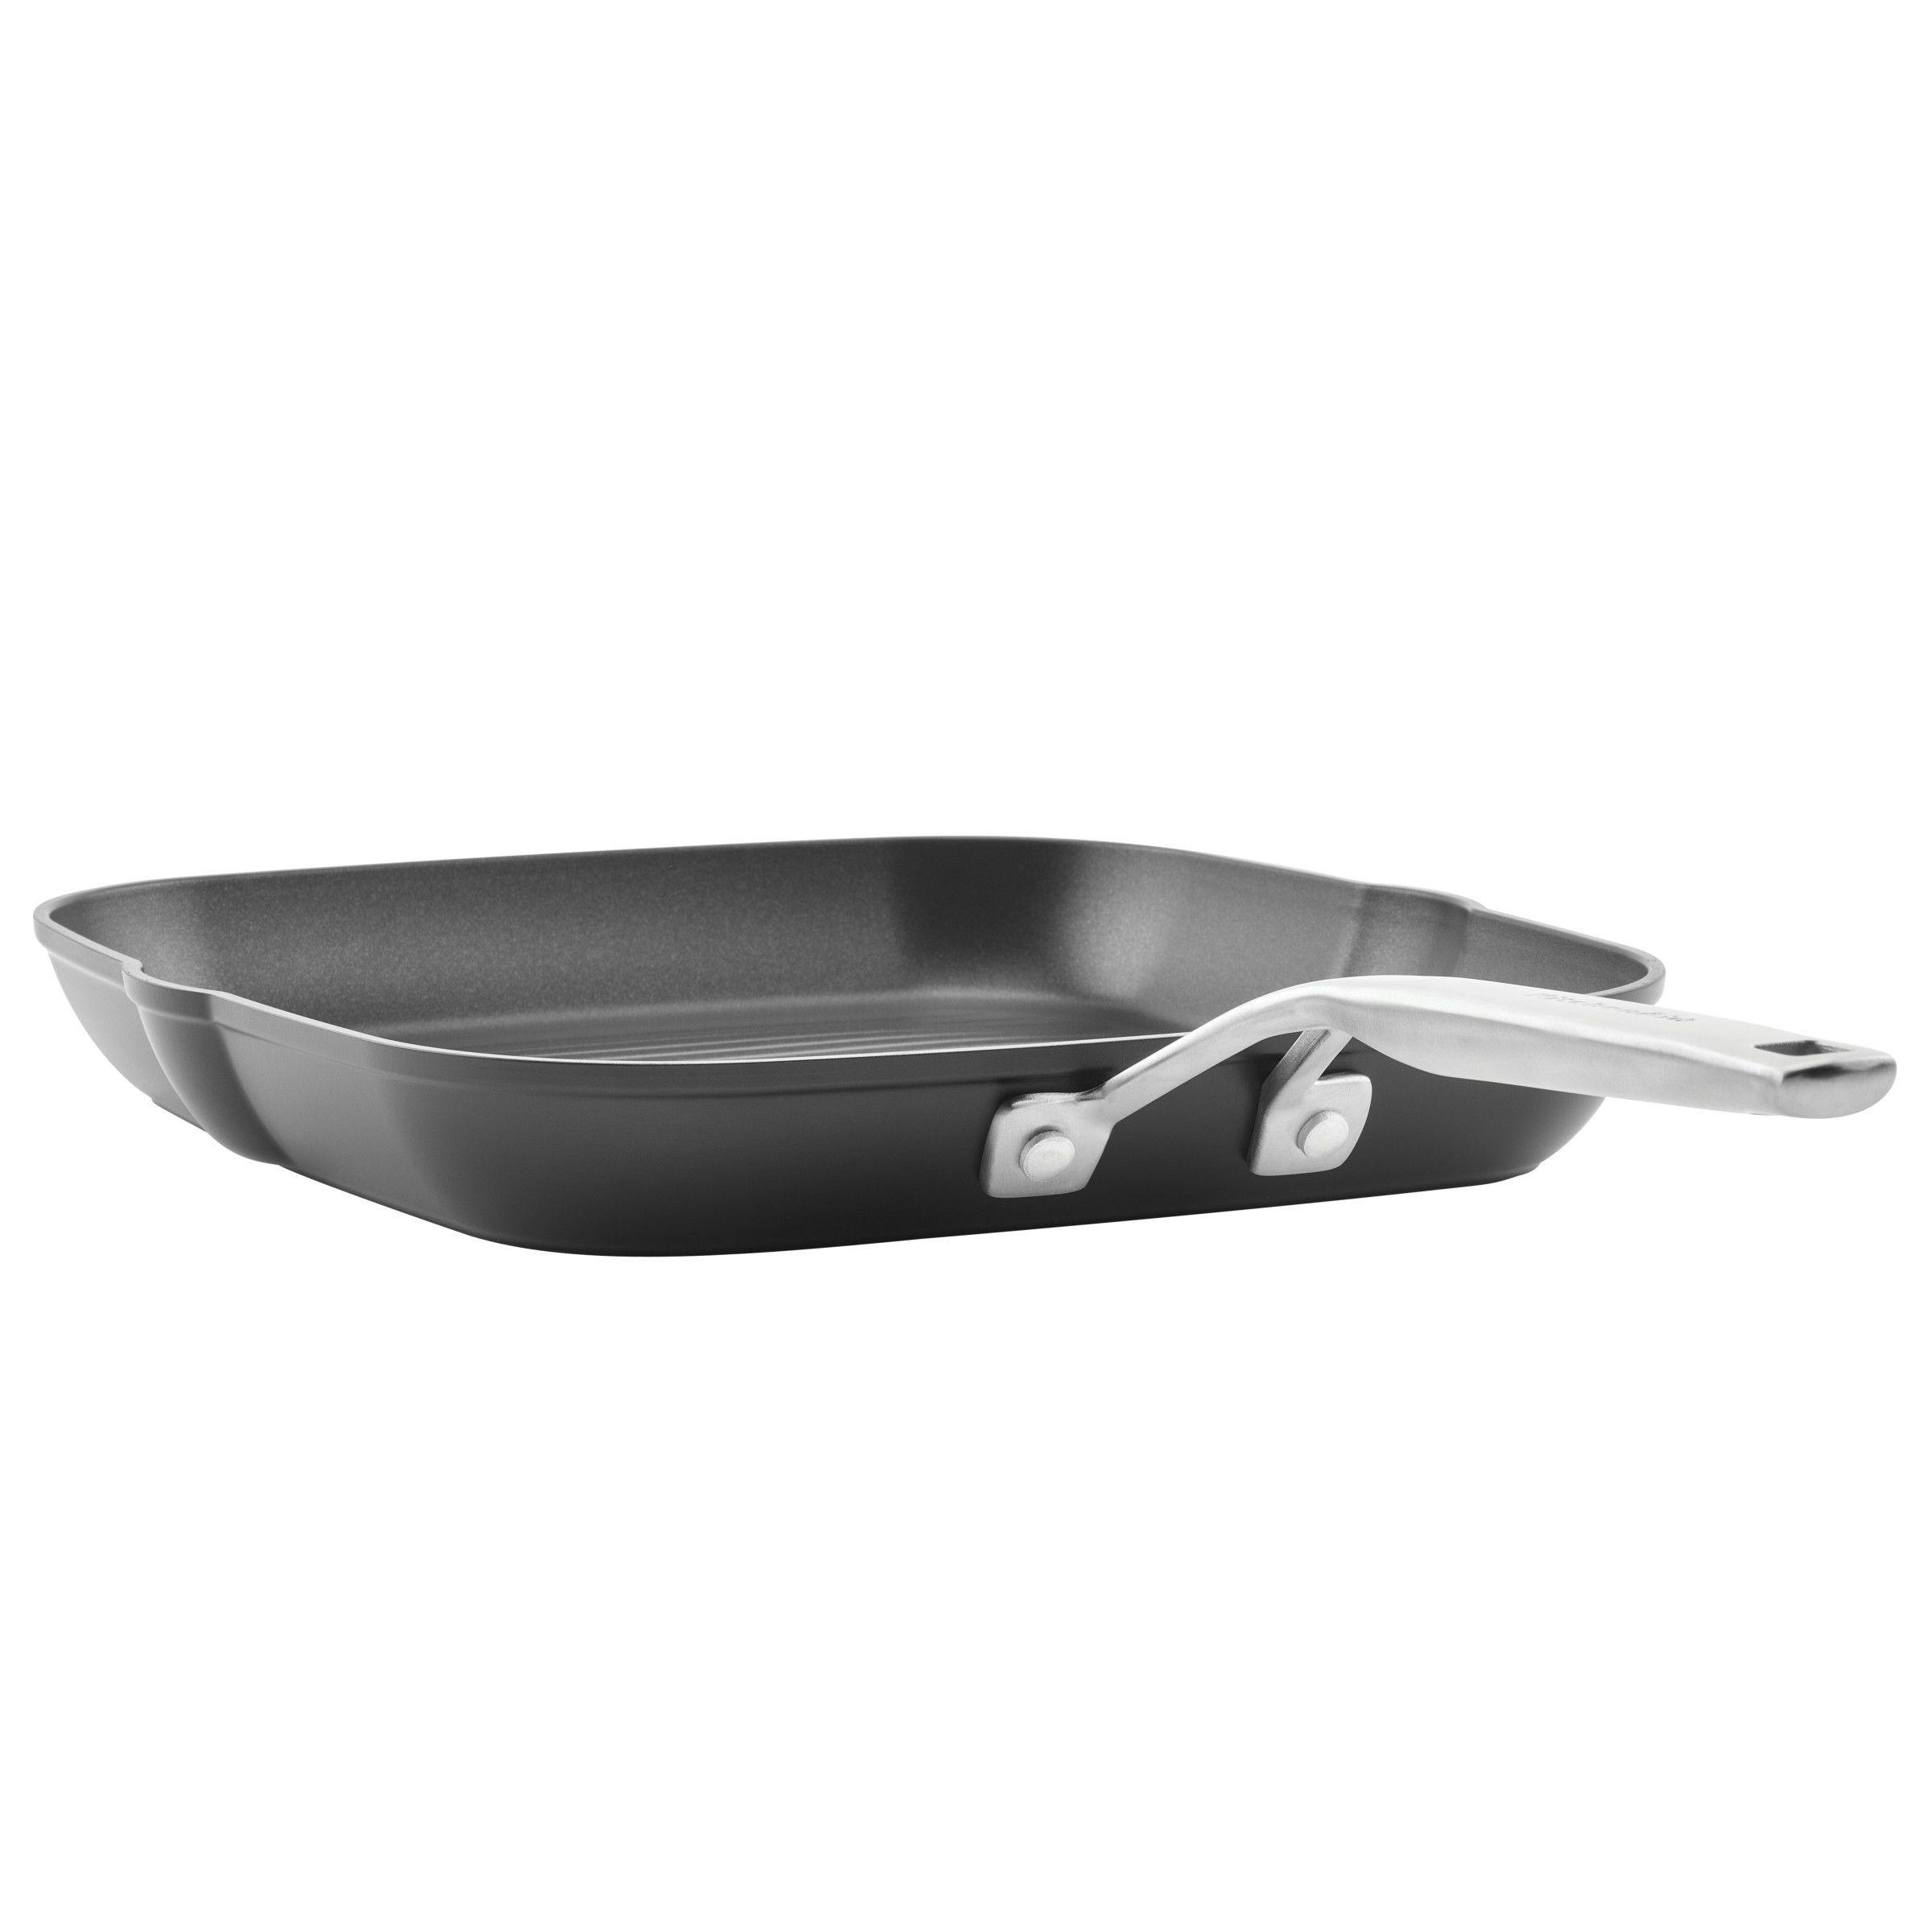 KitchenAid Hard Anodized Induction Nonstick Square Grill Pan · 11.25 Inch · Matte Black